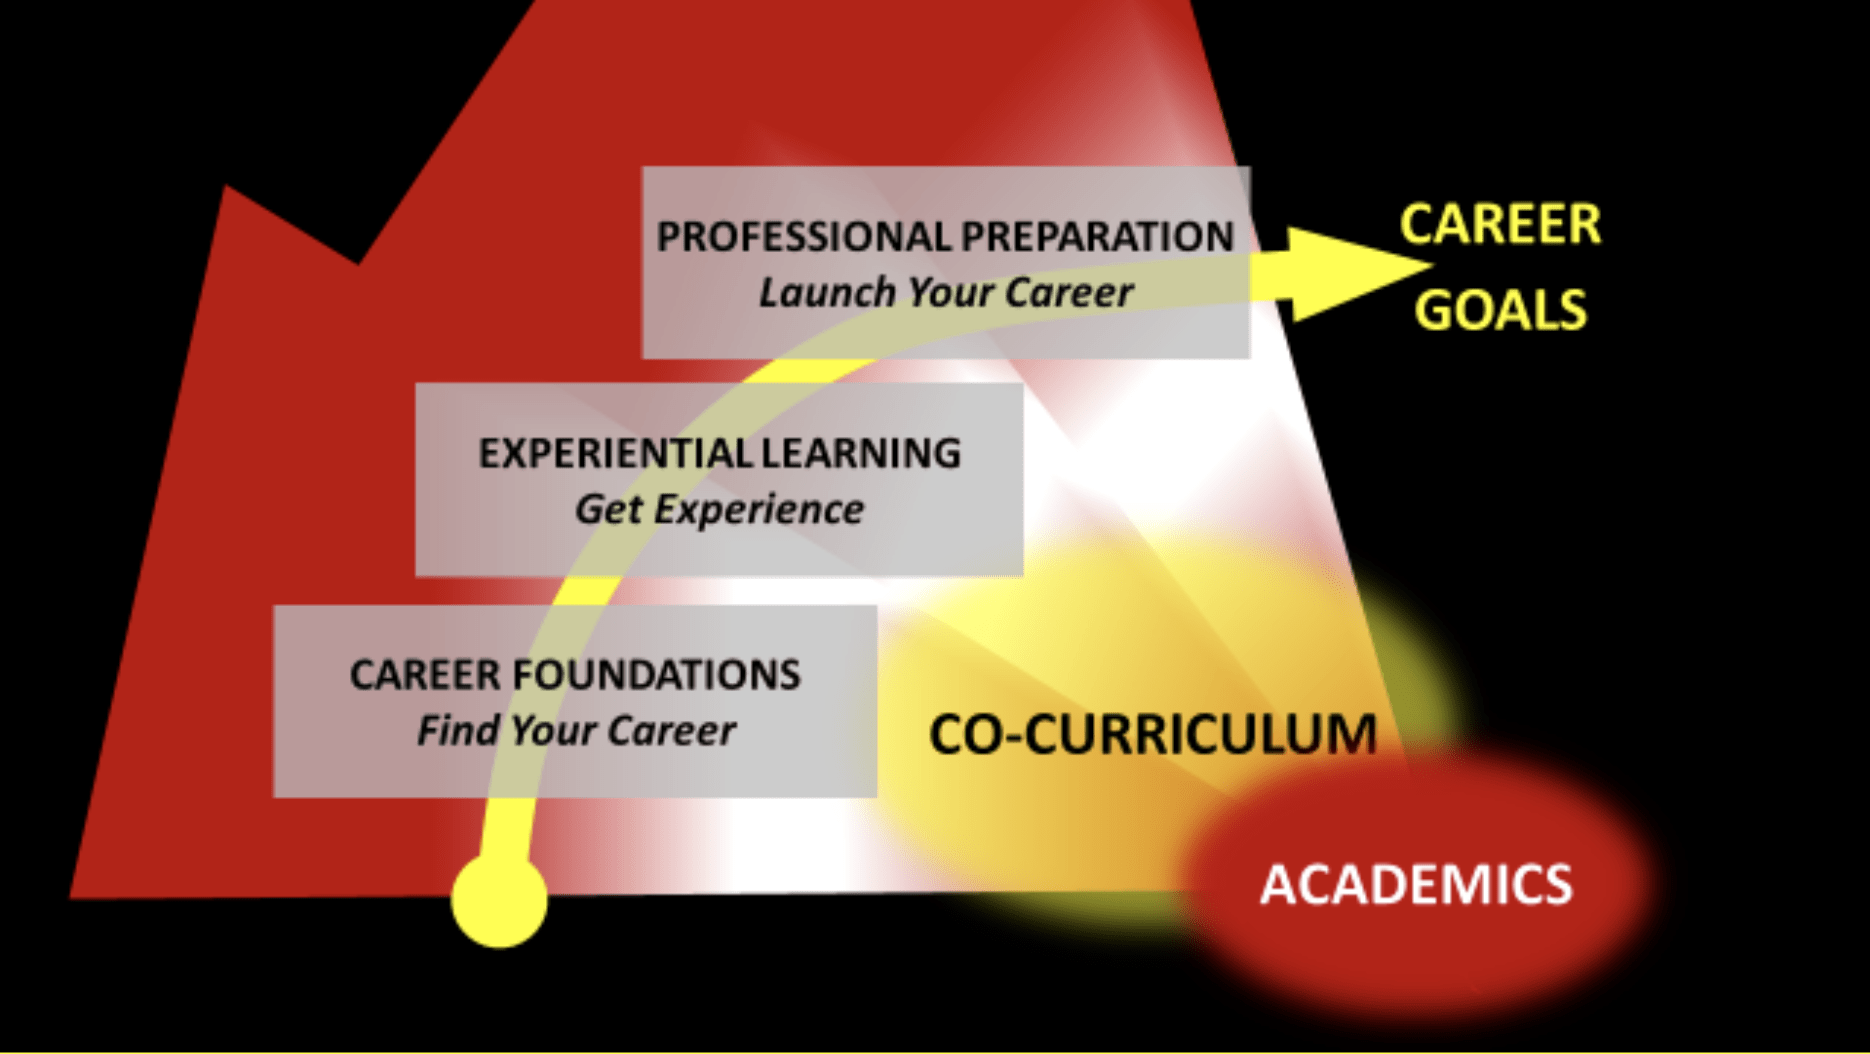 Career Foundations > Experiential Learning > Professional Preparation > Career Goals